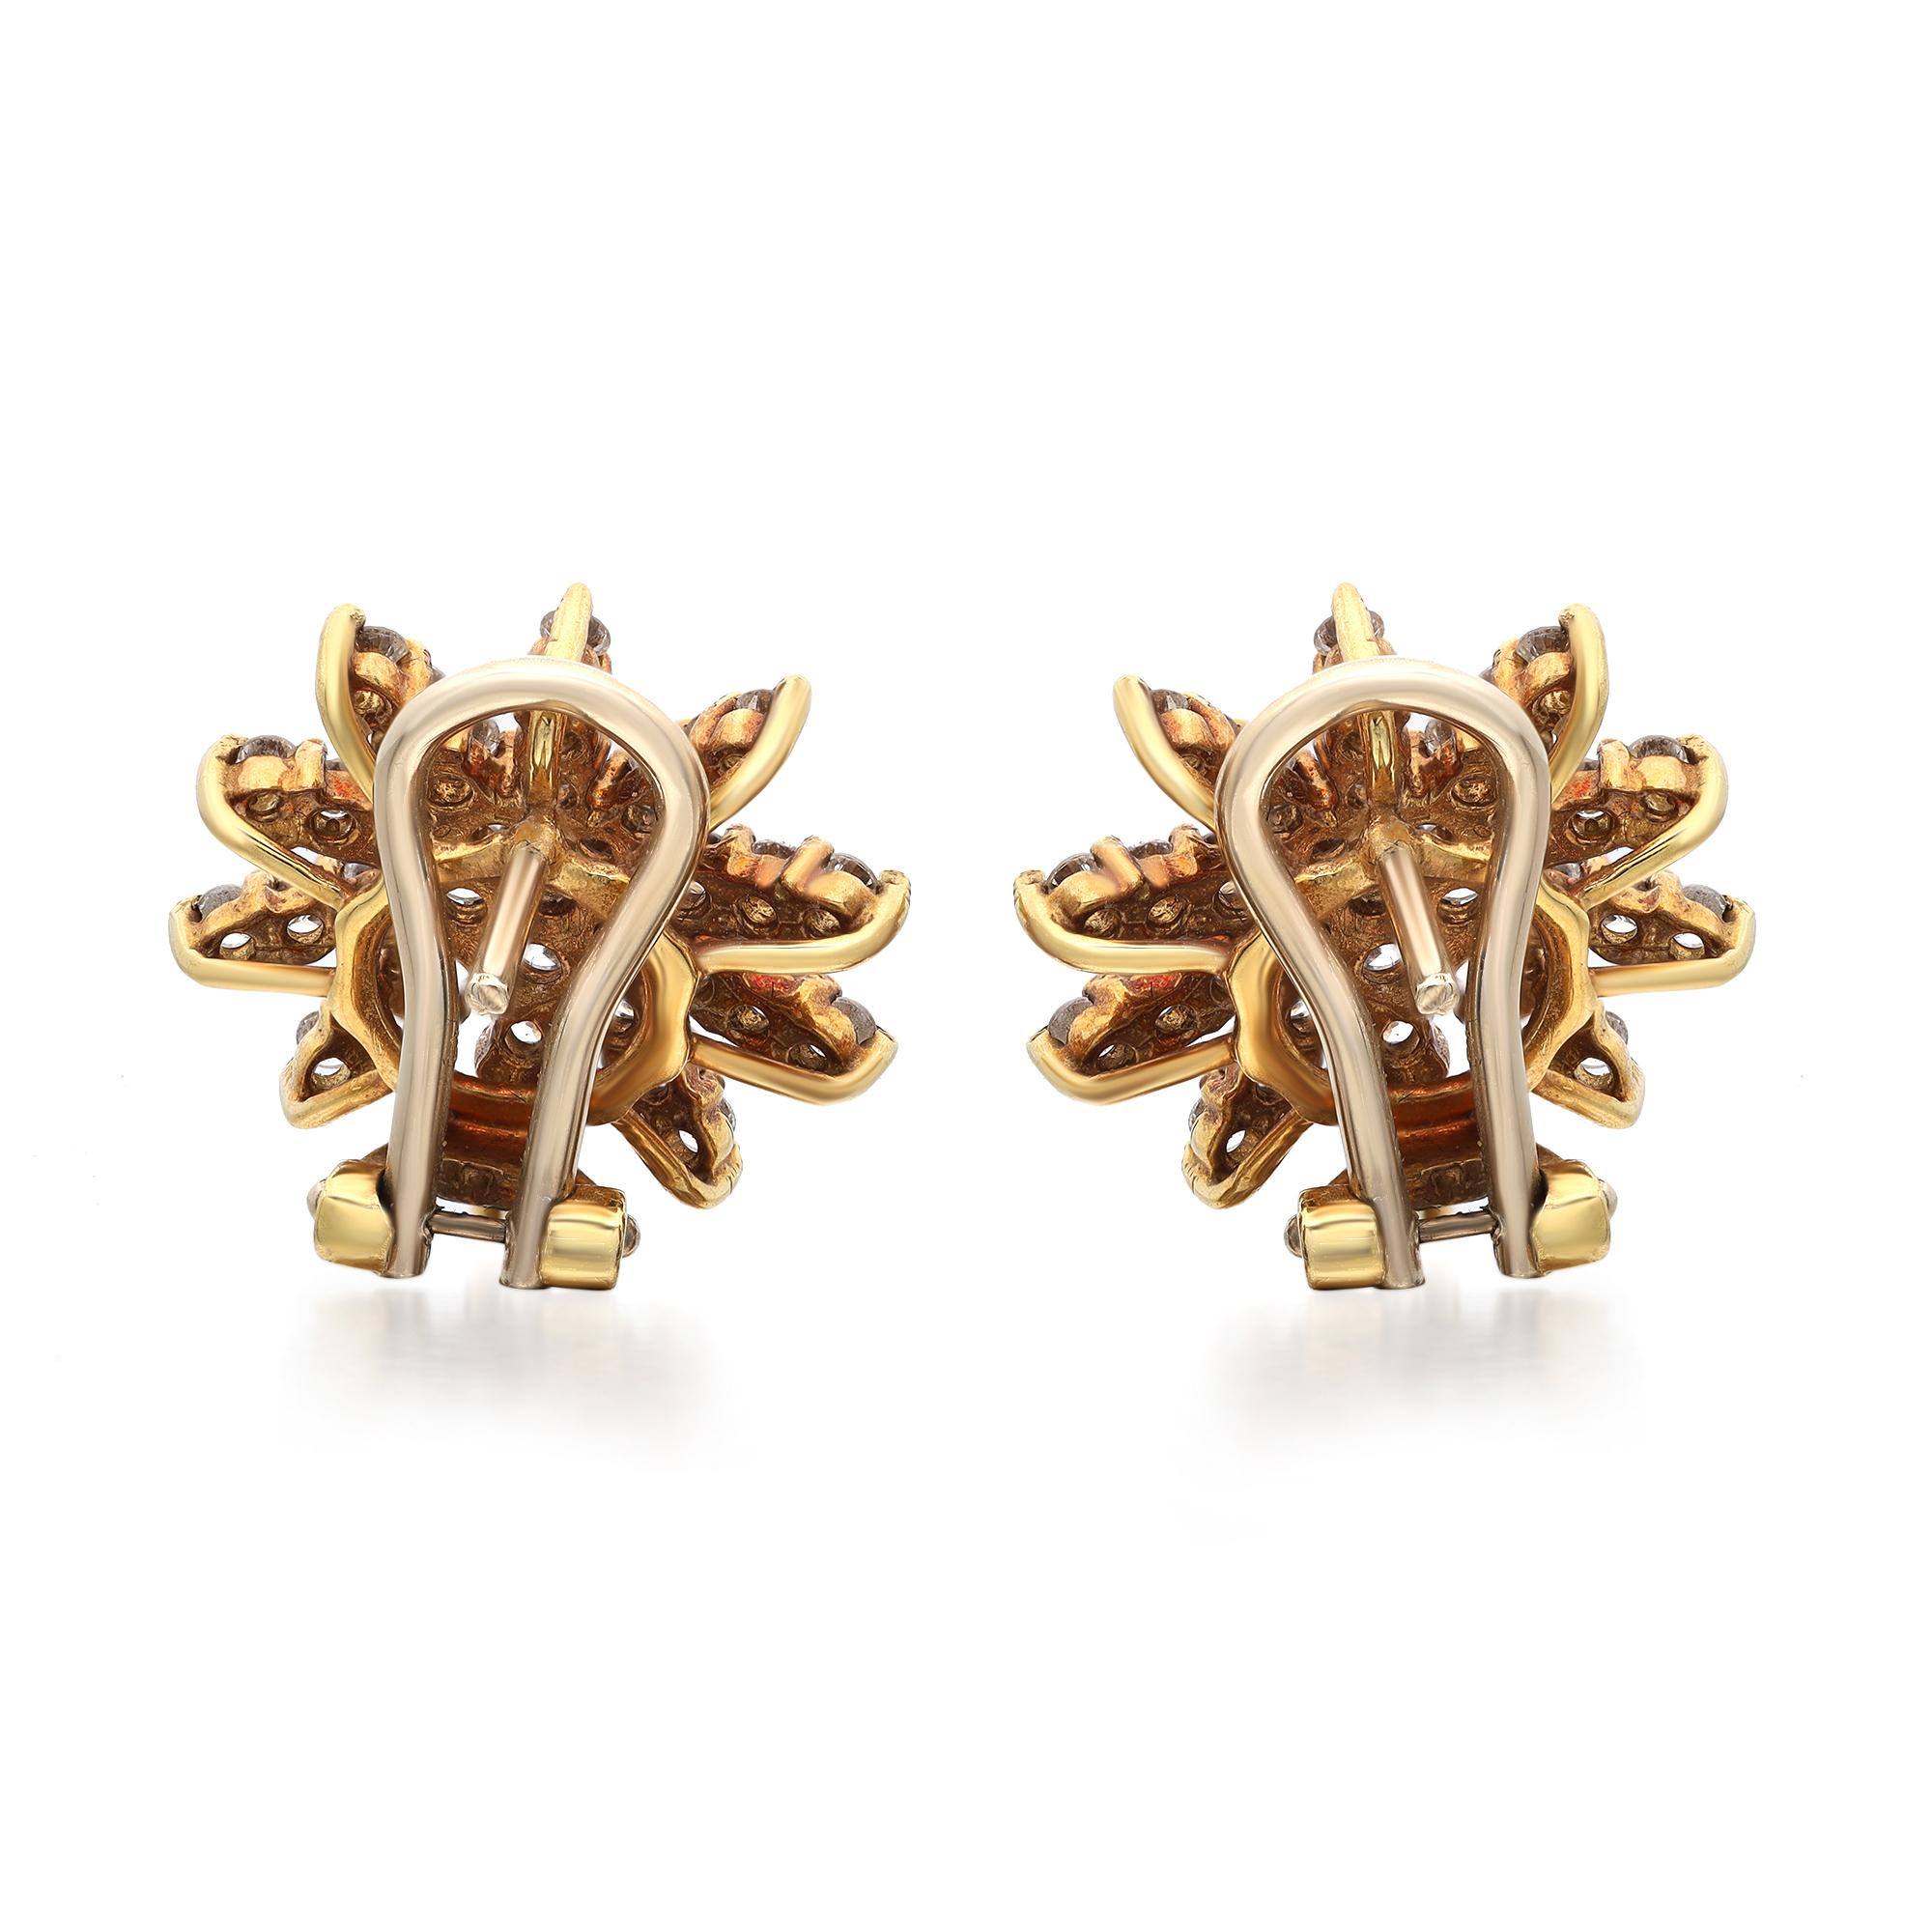 These fanciful floral earrings are reminiscent of springtime blooms. Featuring diamond stud earrings crafted in 18k yellow gold. These earrings are encrusted with prong set round brilliant cut diamonds weighing 1.85 carats. Diamond quality: color